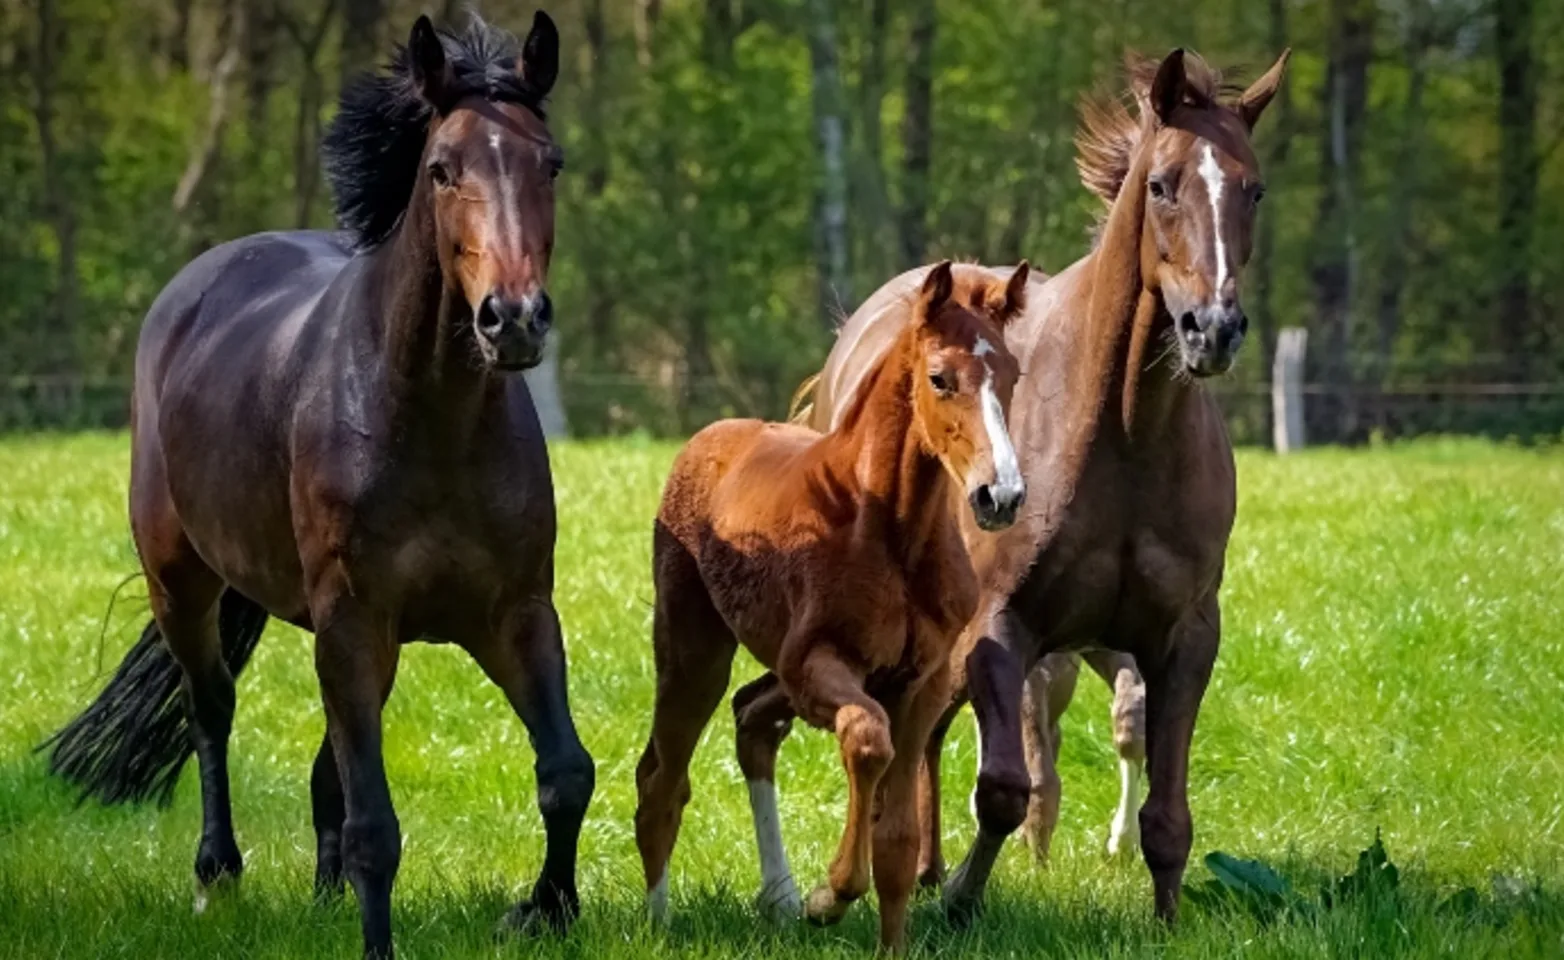 Steed, mare, and foal brown horses running through grass field